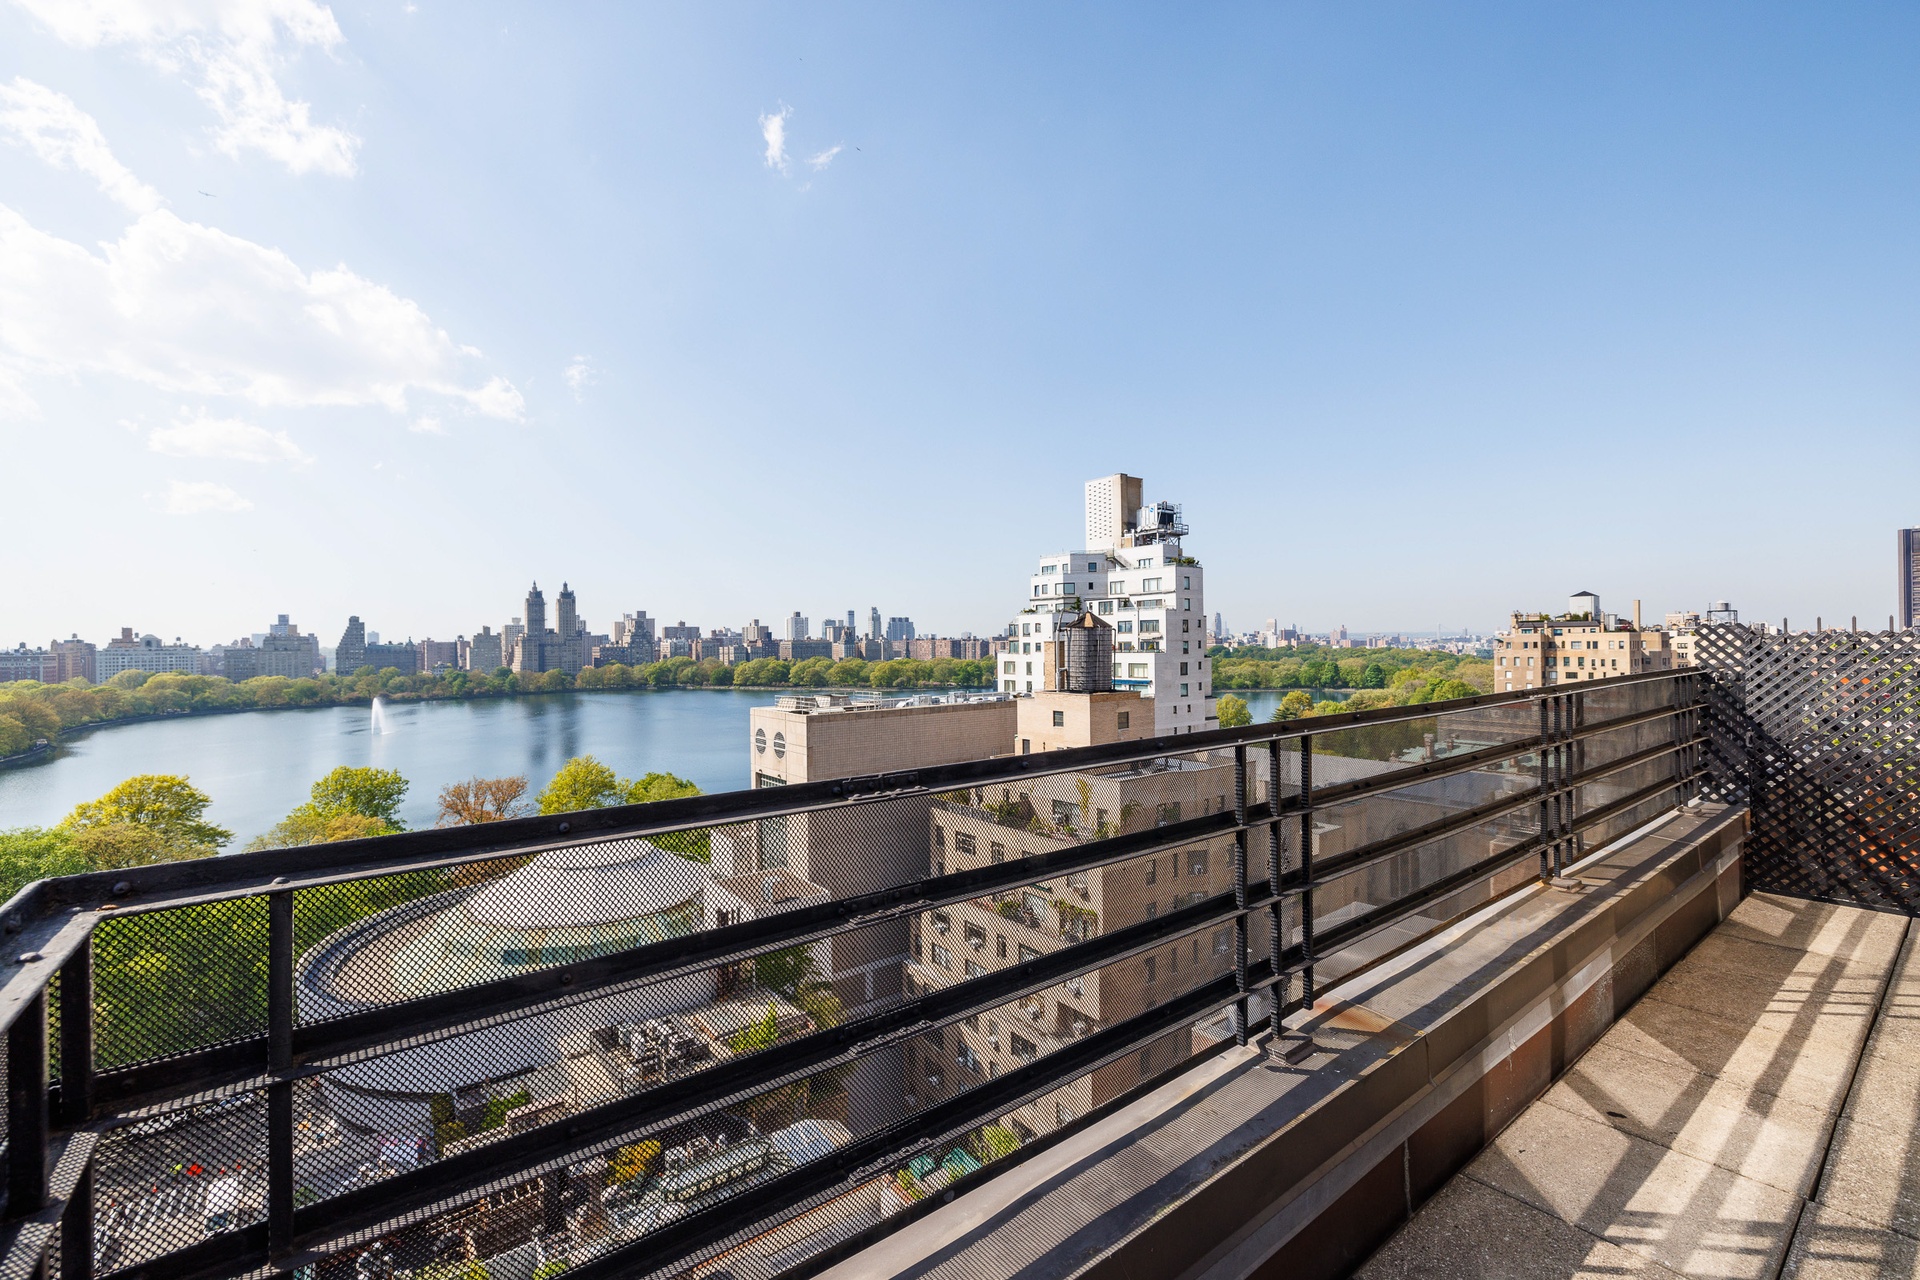 19 East 88th Street Ph-D, Carnegie Hill, Upper East Side, NYC - 2 Bedrooms  
2.5 Bathrooms  
6 Rooms - 